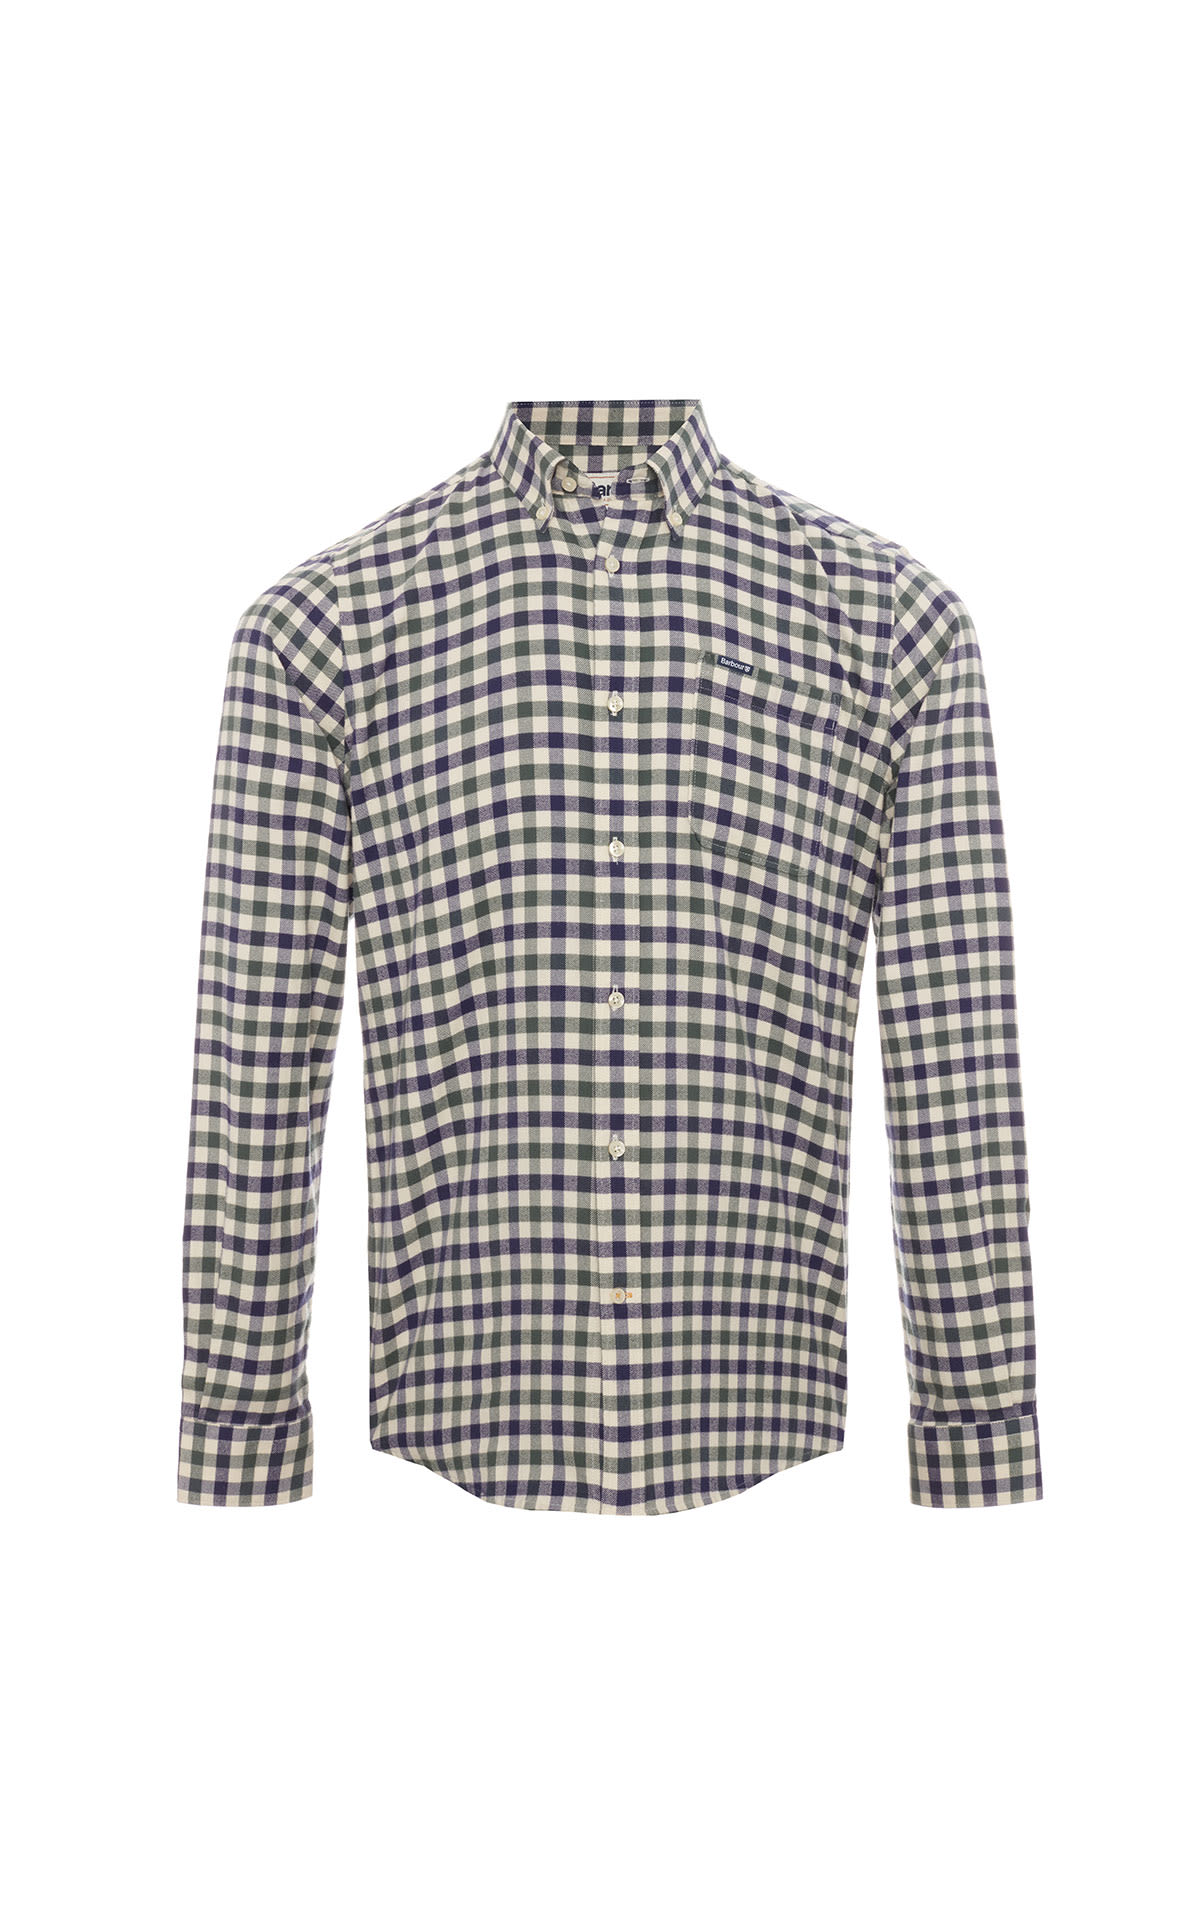 Barbour Long sleeve check shirt from Bicester Village